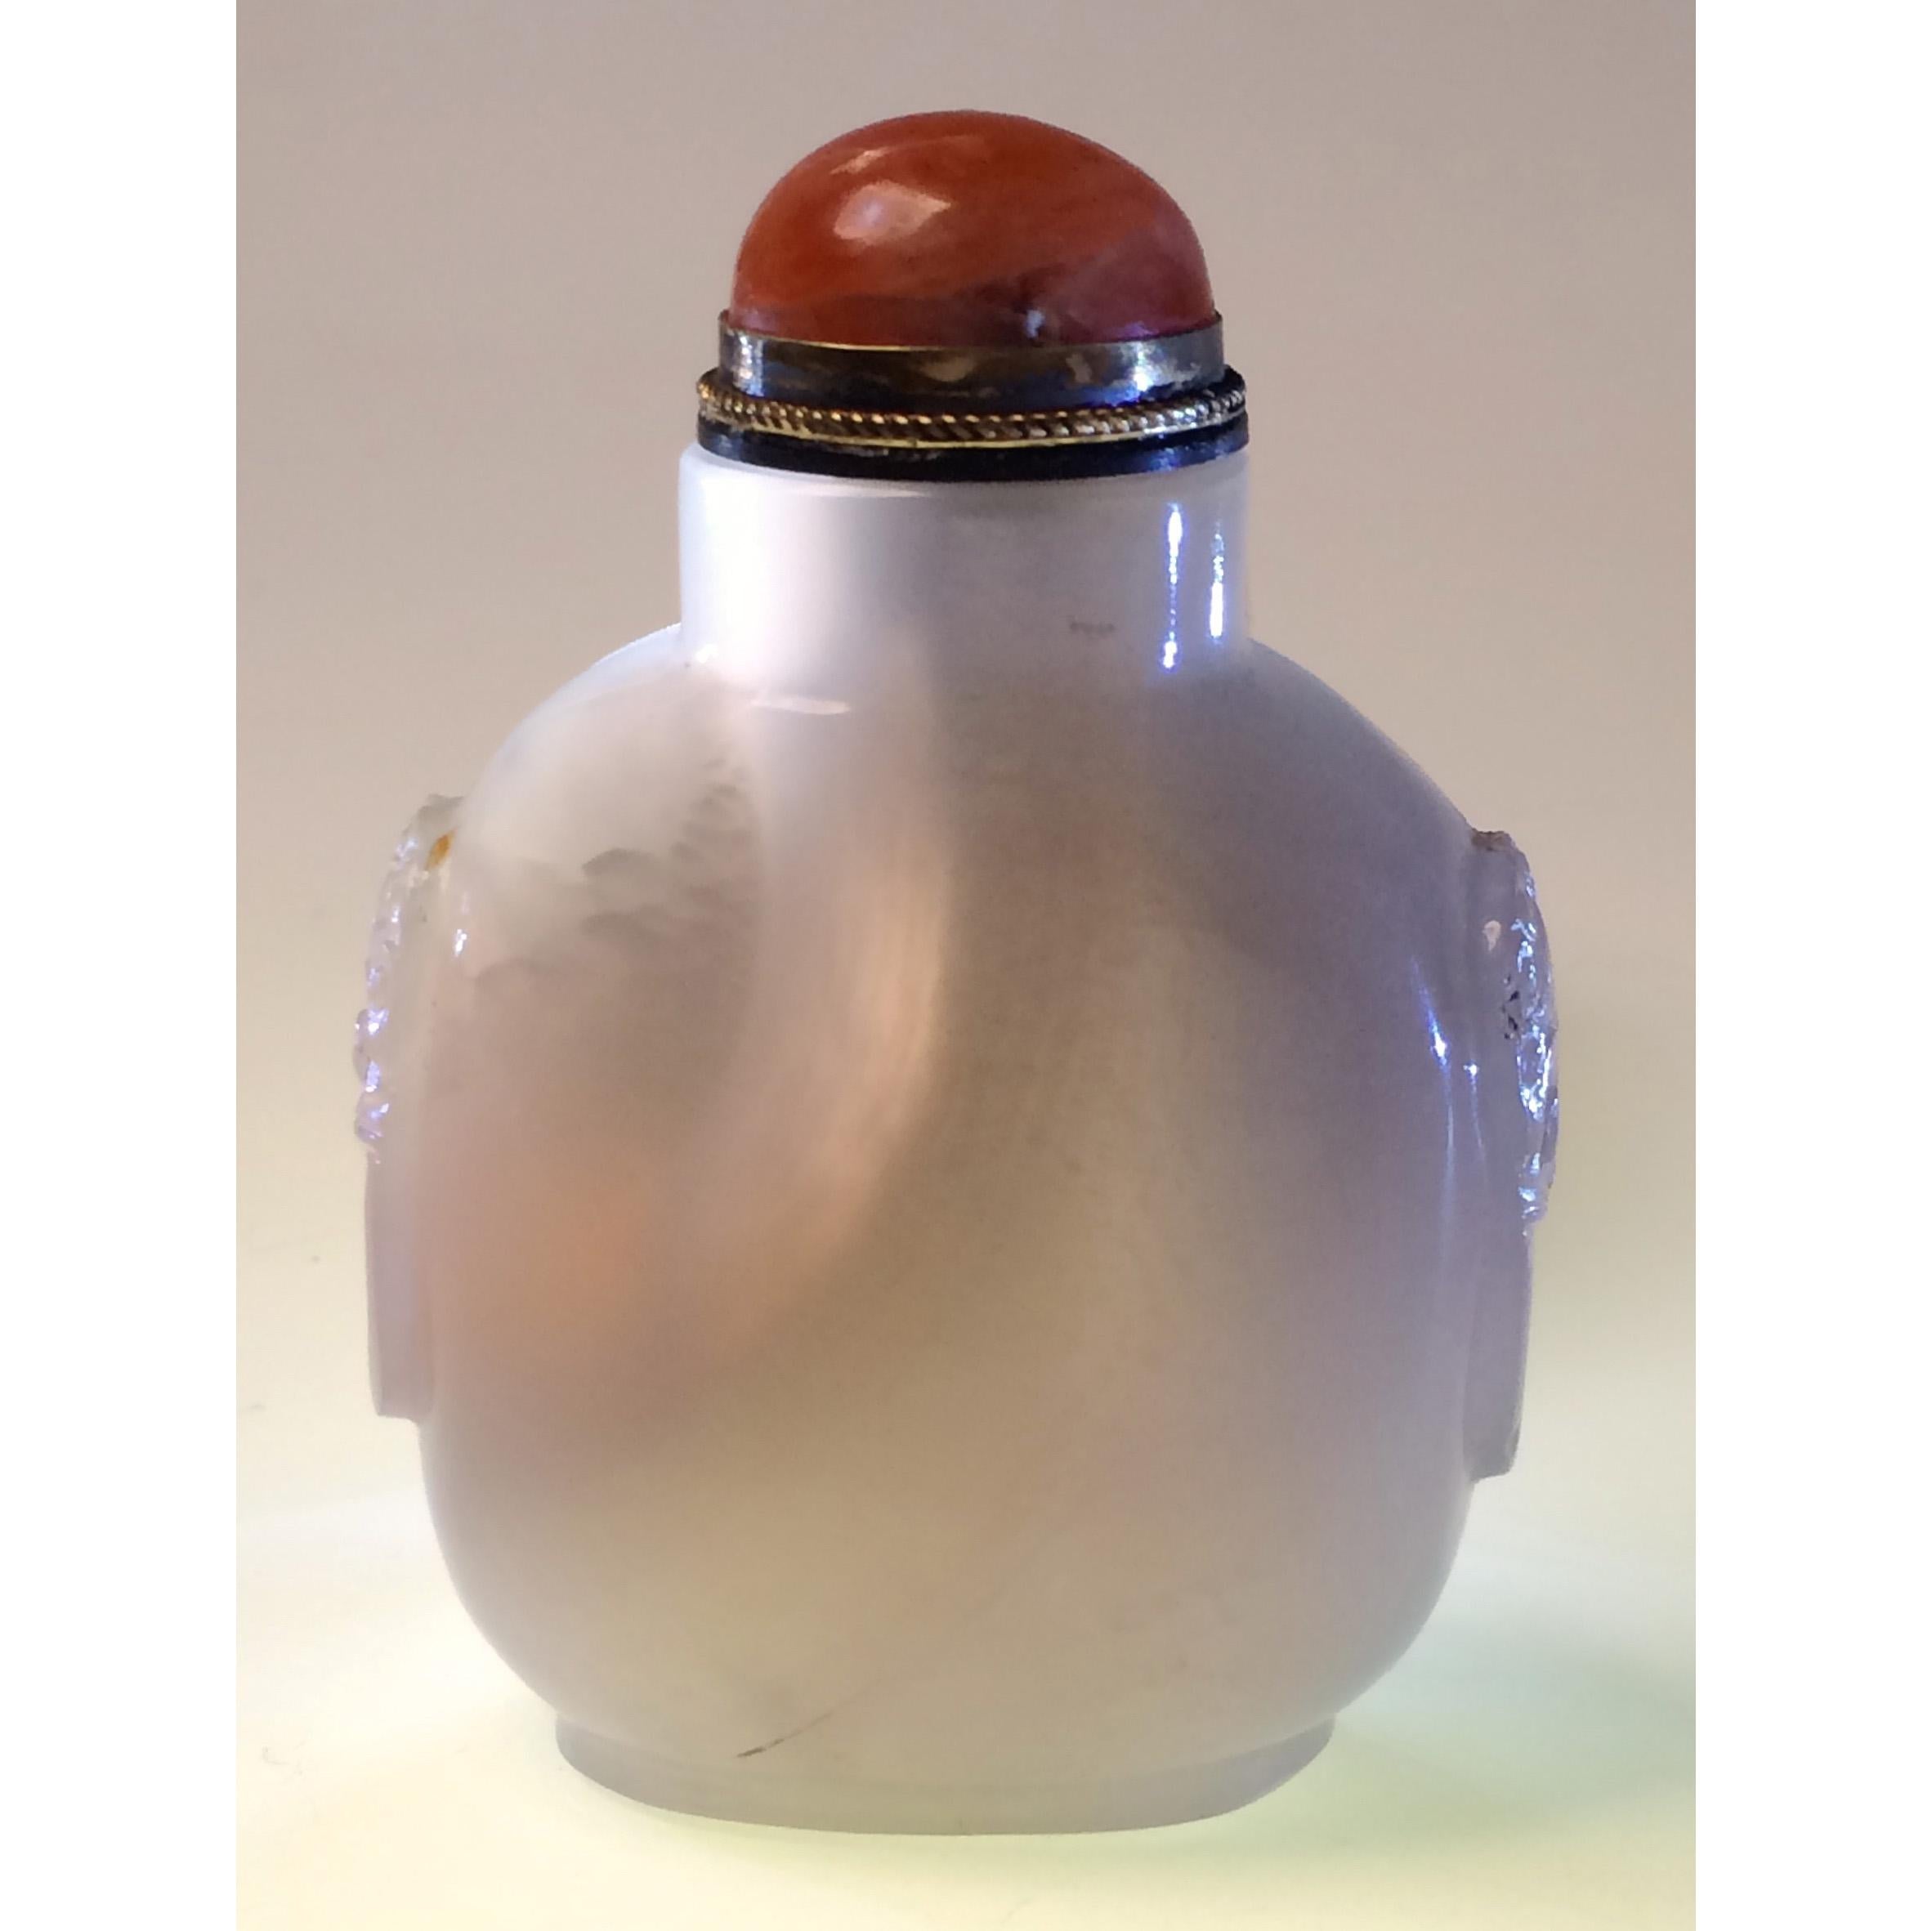 Antique Chinese cameo agate snuff bottle, rounded square from with raised foot rim and round neck, concave mouth rim, narrow mouth, well hollowed depicting a horse, bee and a monkey (all symbolic of a wish for a promotion) in relief on the front